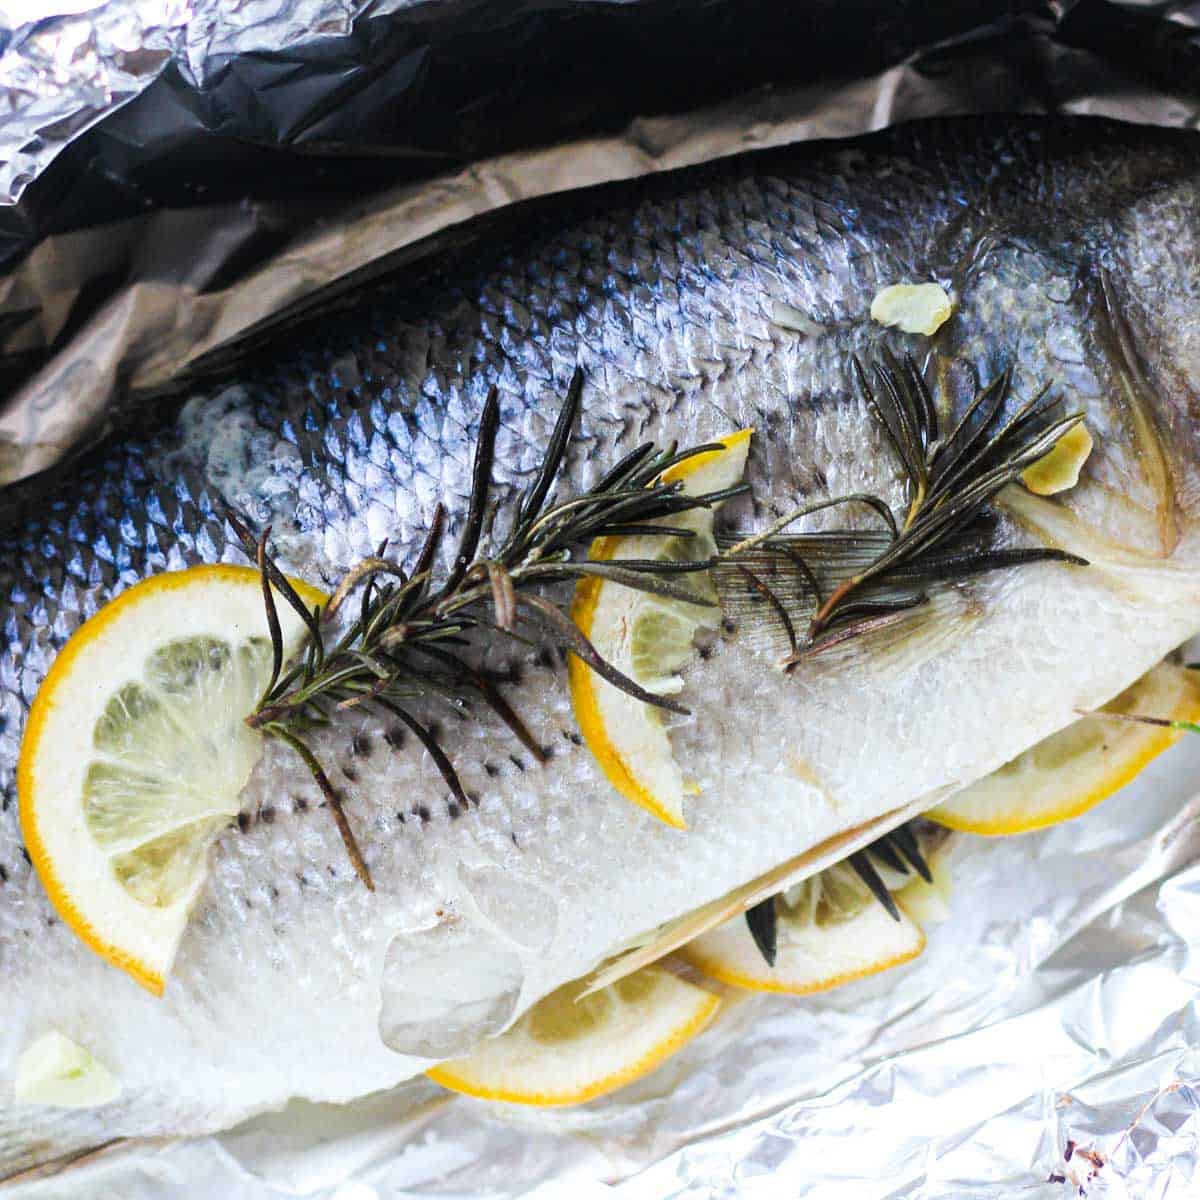 Baked whole striped bass in foil - The Top Meal